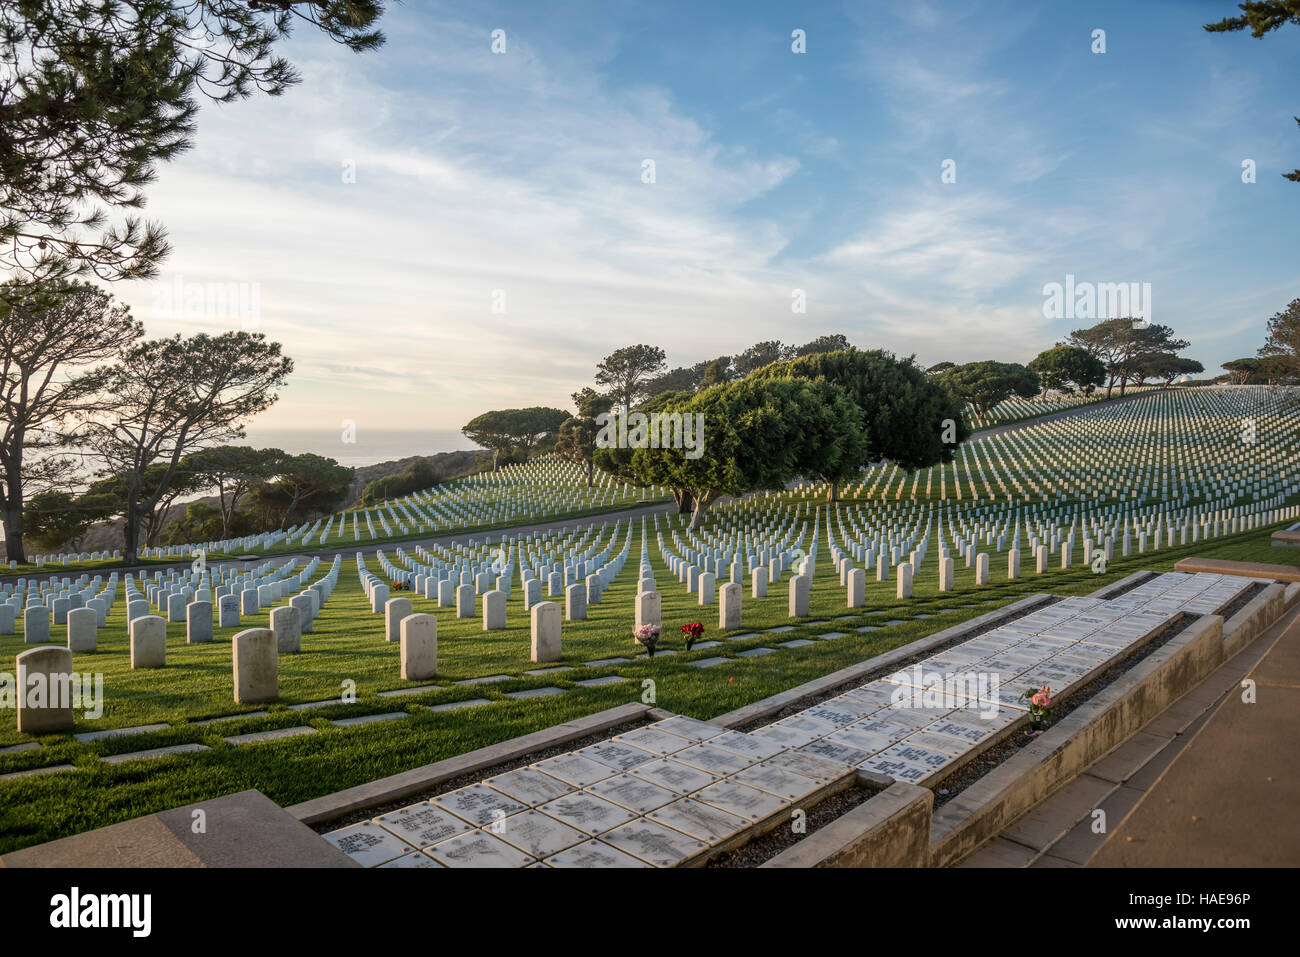 Fort Rosecrans National Cemetery is a federal military cemetery in the city of San Diego, California. It is located on the grounds of the former Army Stock Photo